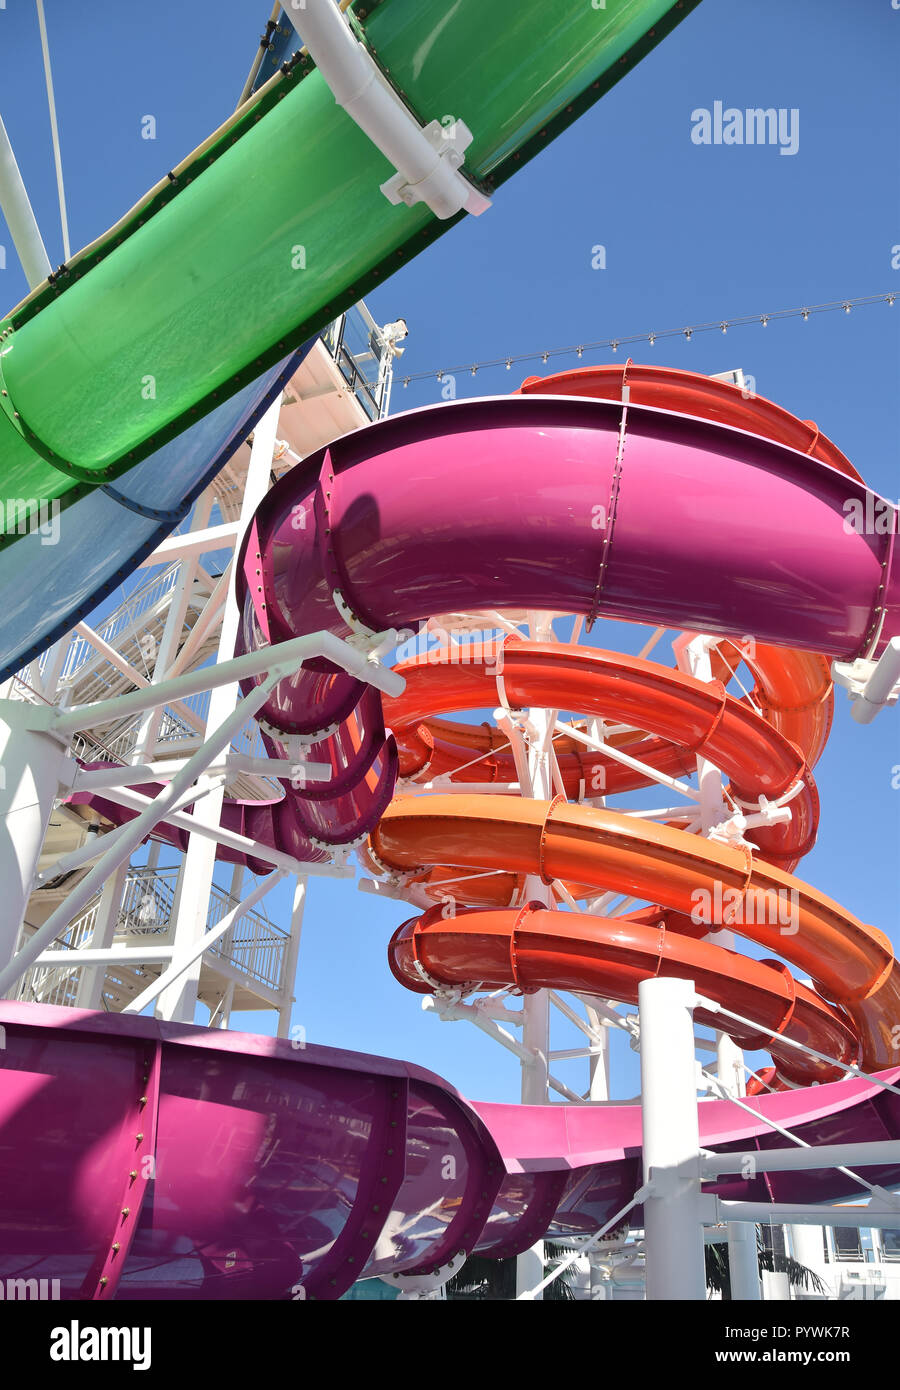 Colorful water slide winding in a spiral Stock Photo